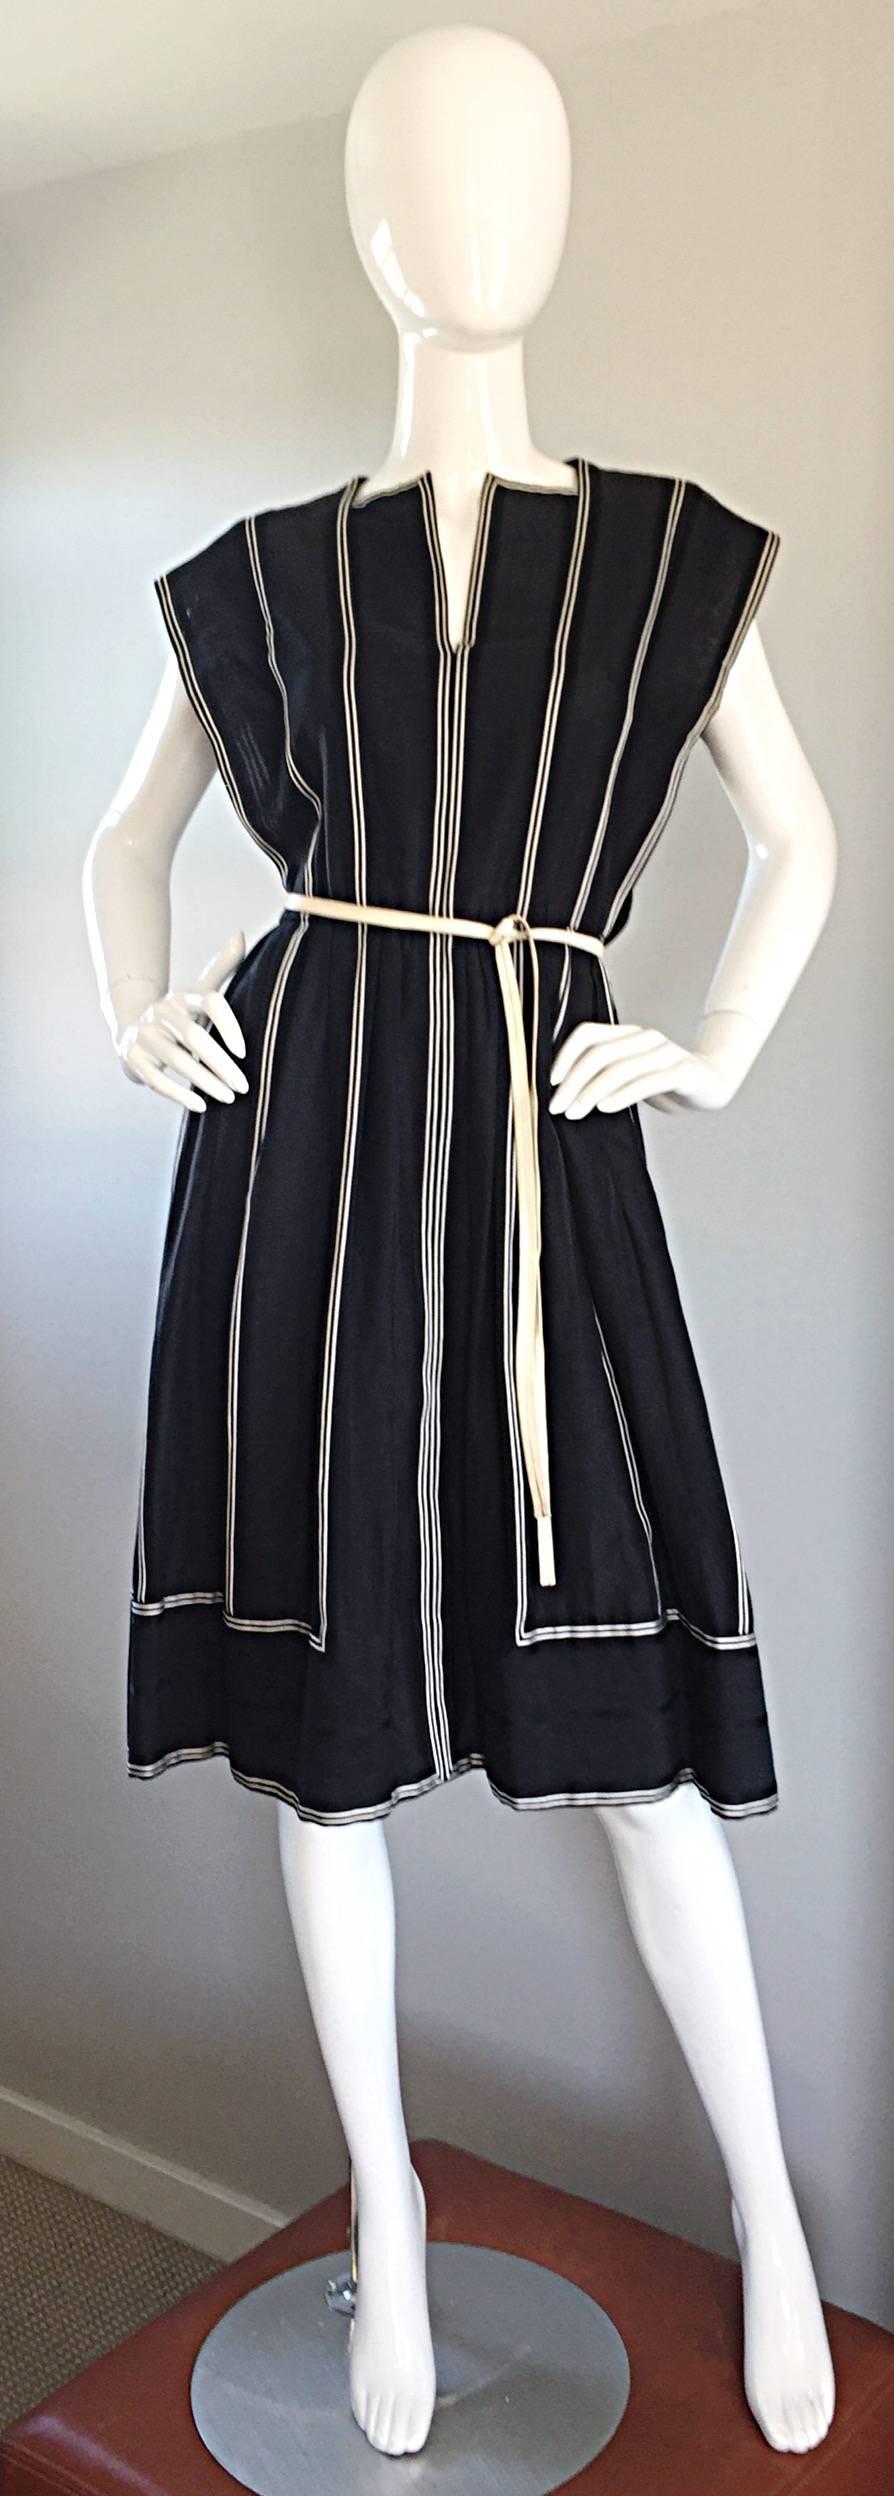 Incredible vintage PAULINE TRIGERE Avant Garde black and white dress! Black and white vertical stripes, that form rectangles at the bottom. Slashed collar, with exaggerated sleeves (no shoulder pads). Features matching detachable leather belt, that